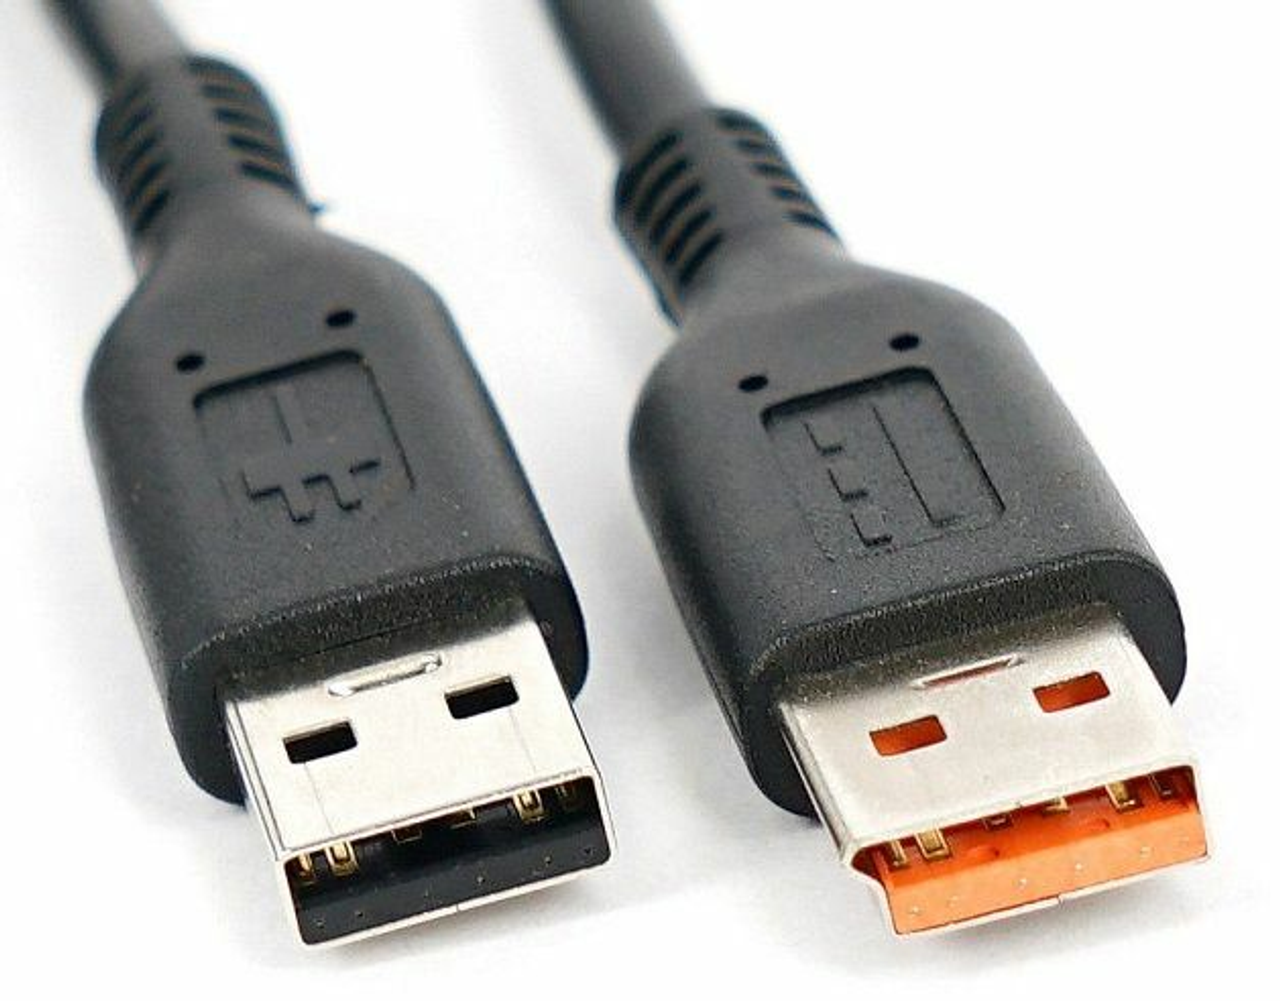 Proprietary USB Cables